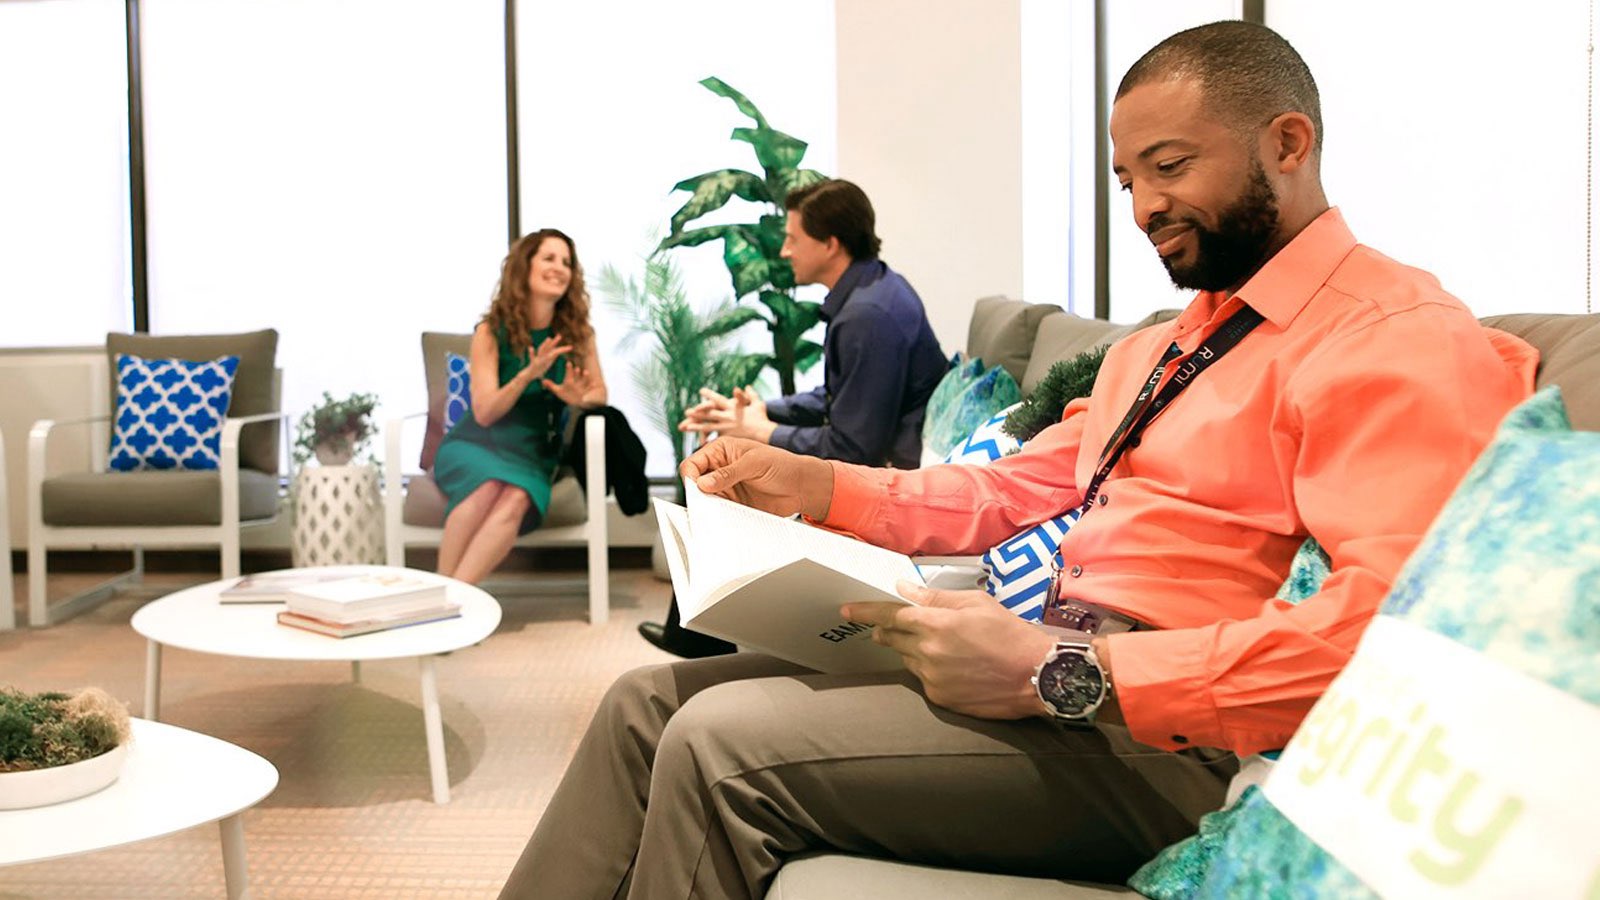 A Rümi employee wearing a bright red shirt smiles as he reads from a folio on a beige couch in the office. In the background, employees smile and collaborate. 